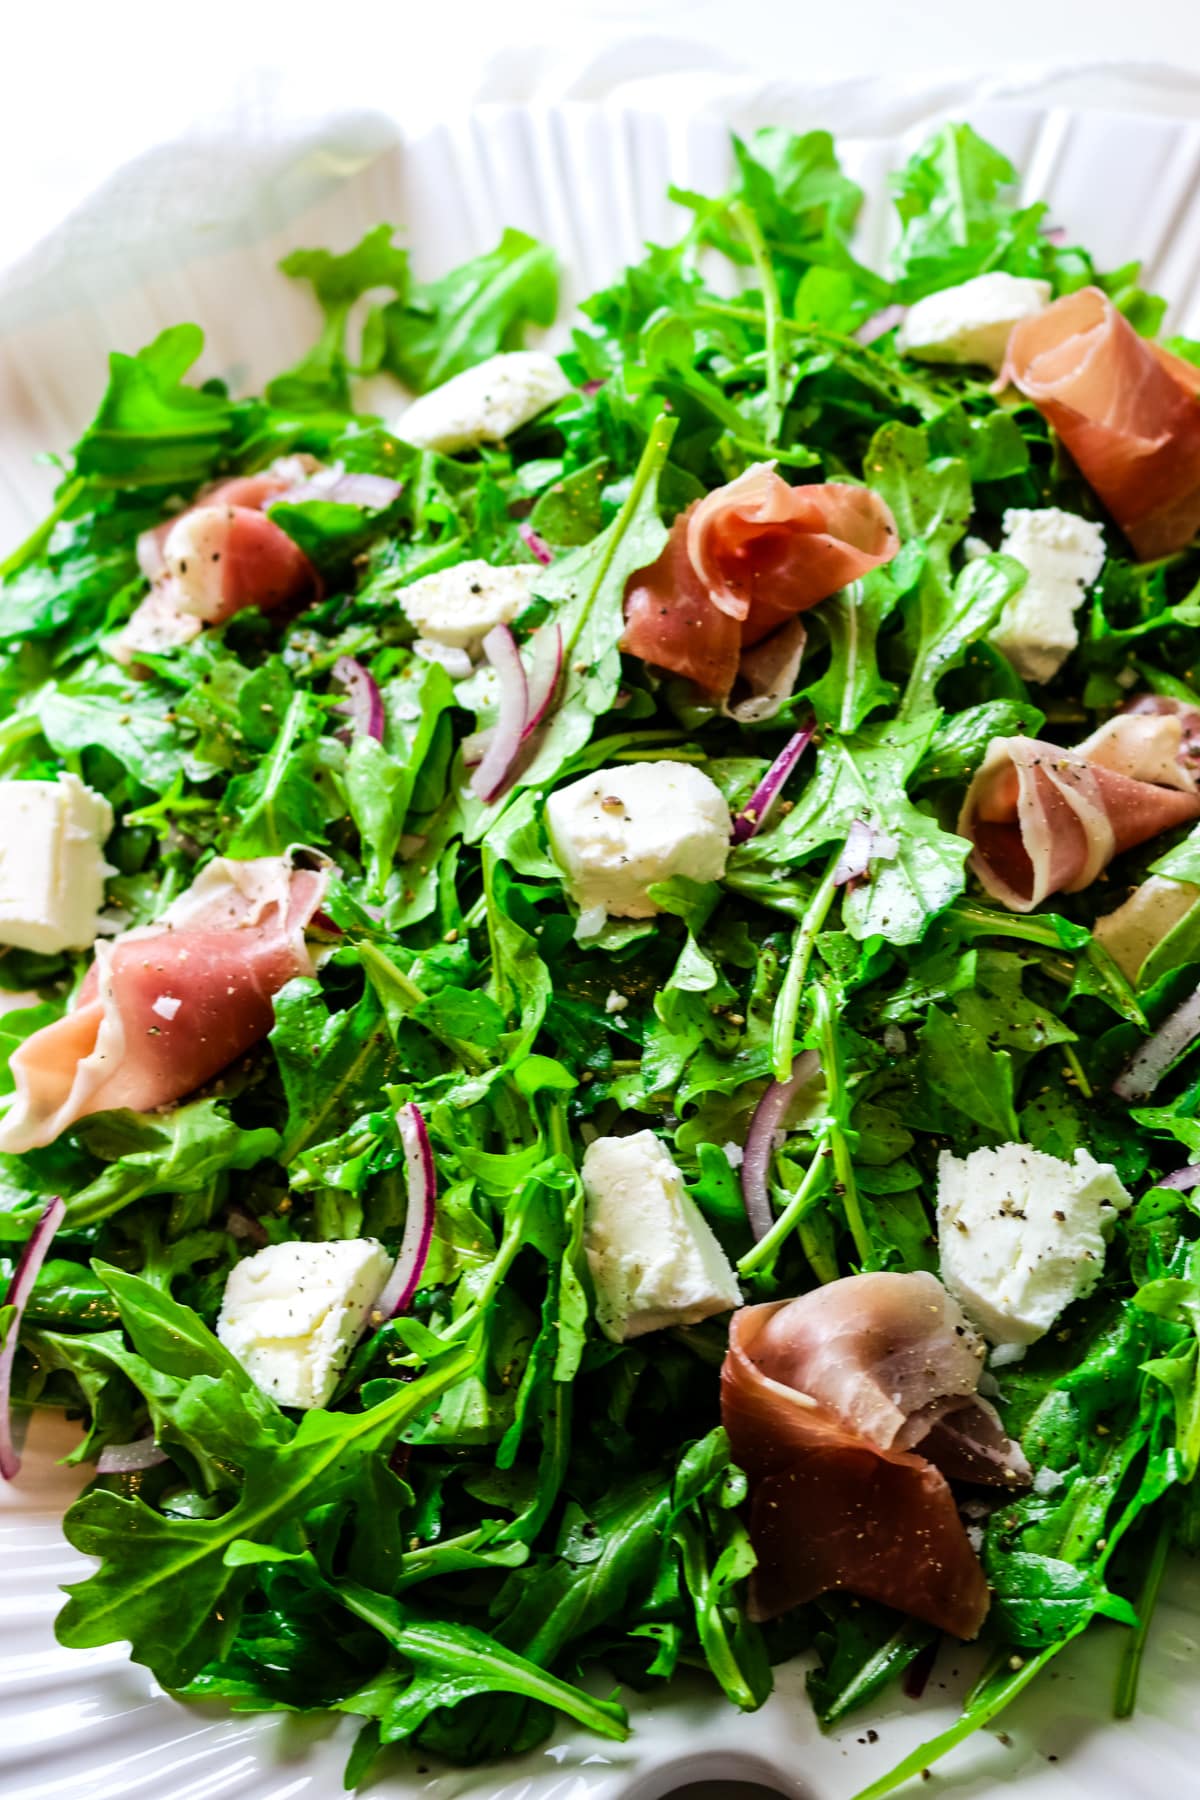 arugula salad with red onions, goat cheese chunks, and wrapped prosciutto on a bed of arugula with cracked black pepper.